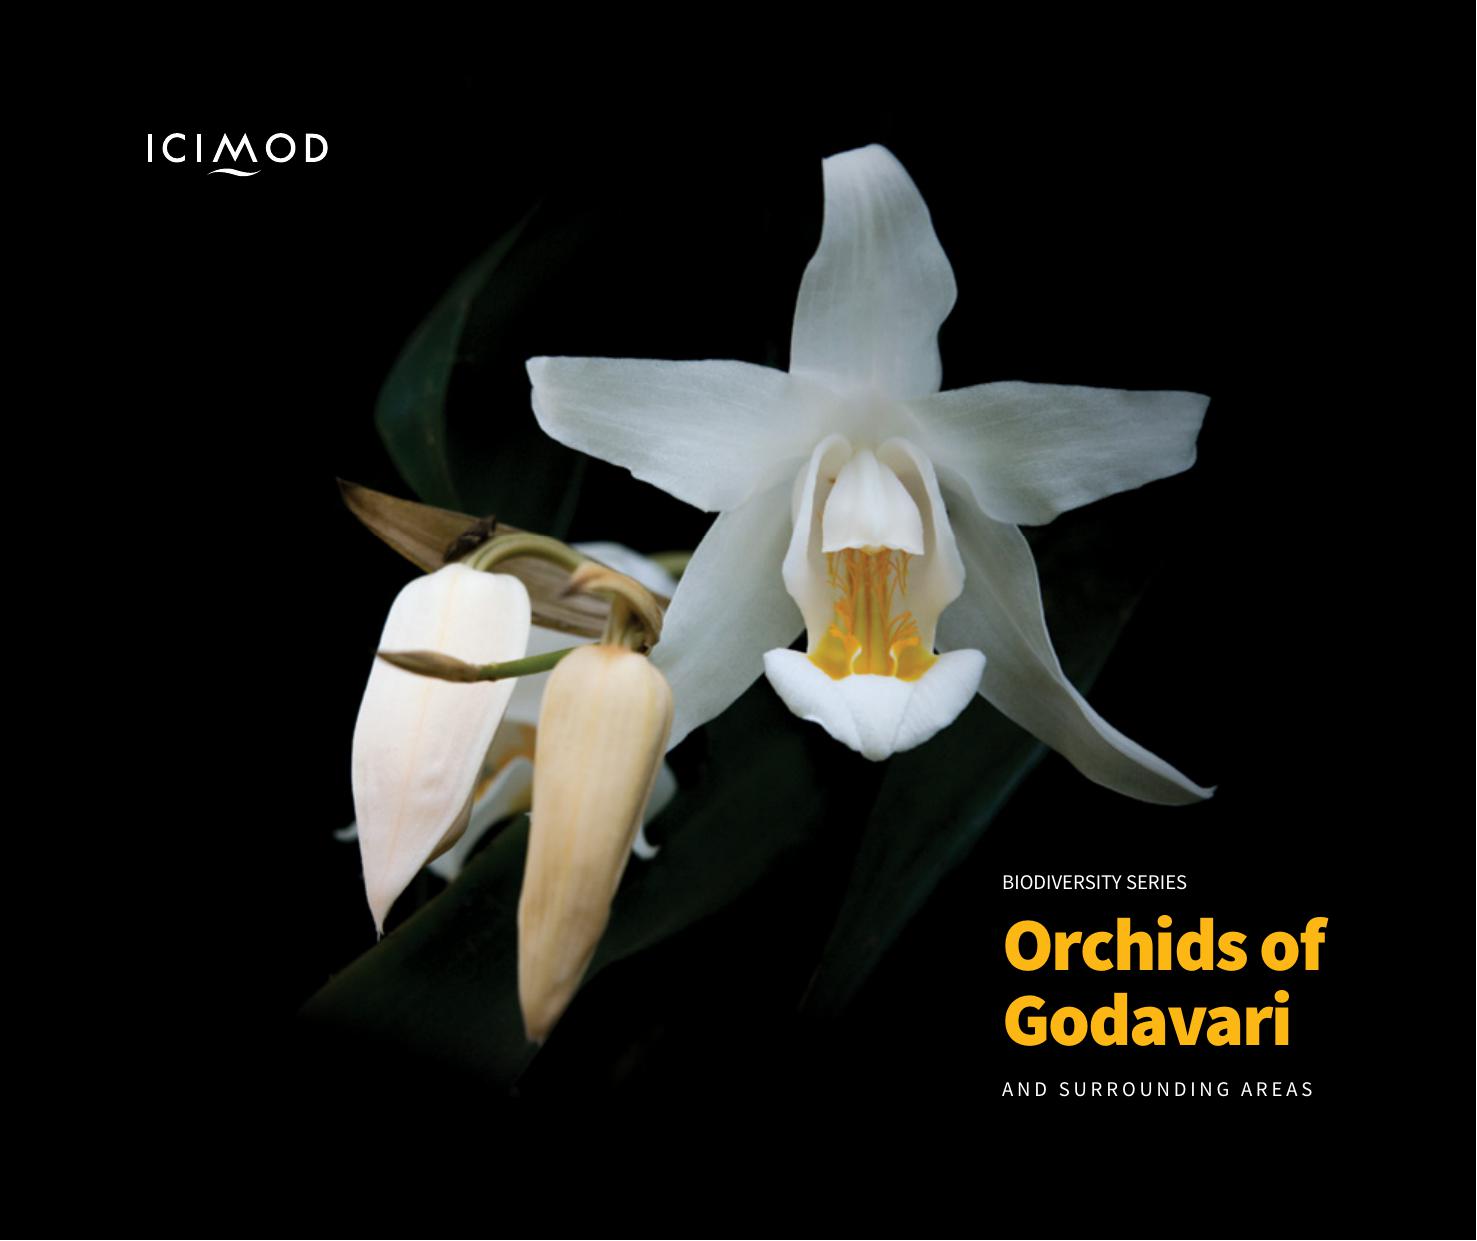 Orchids of Godavari and surrounding areas